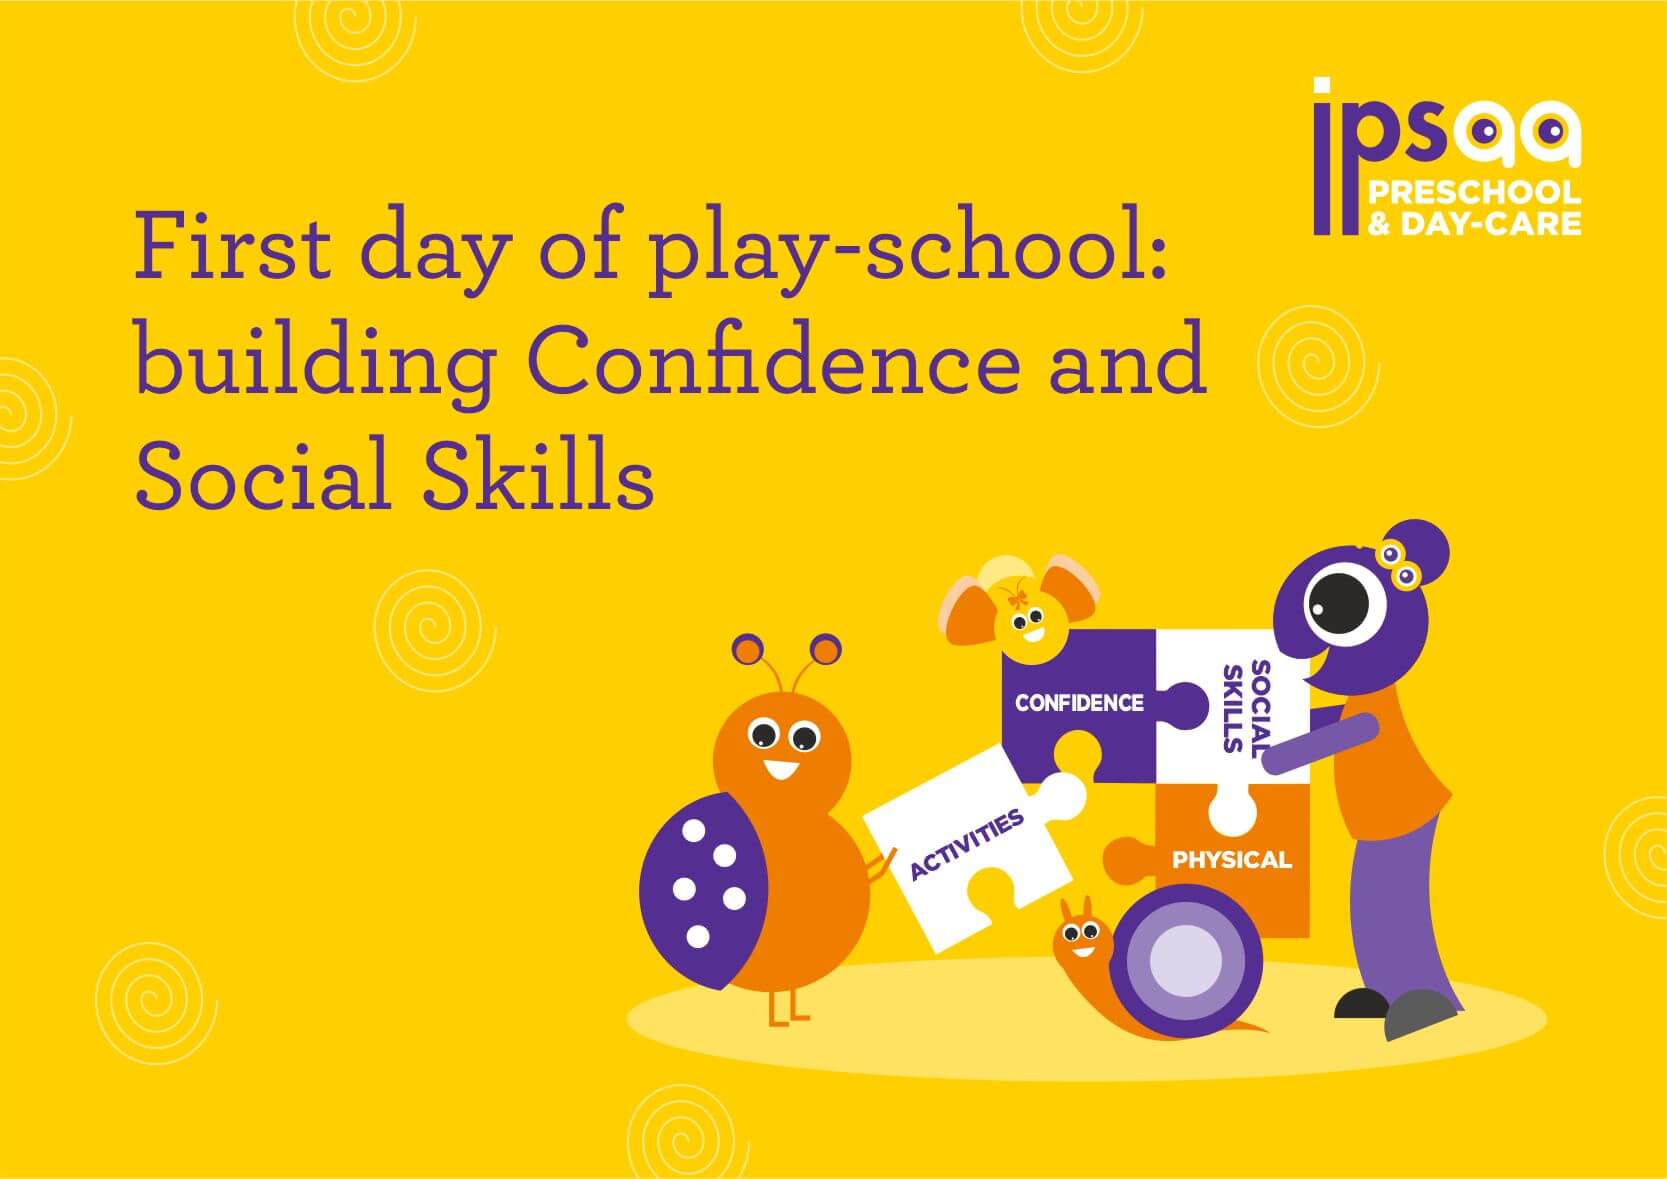 First day of playschool: Building confidence and social skills